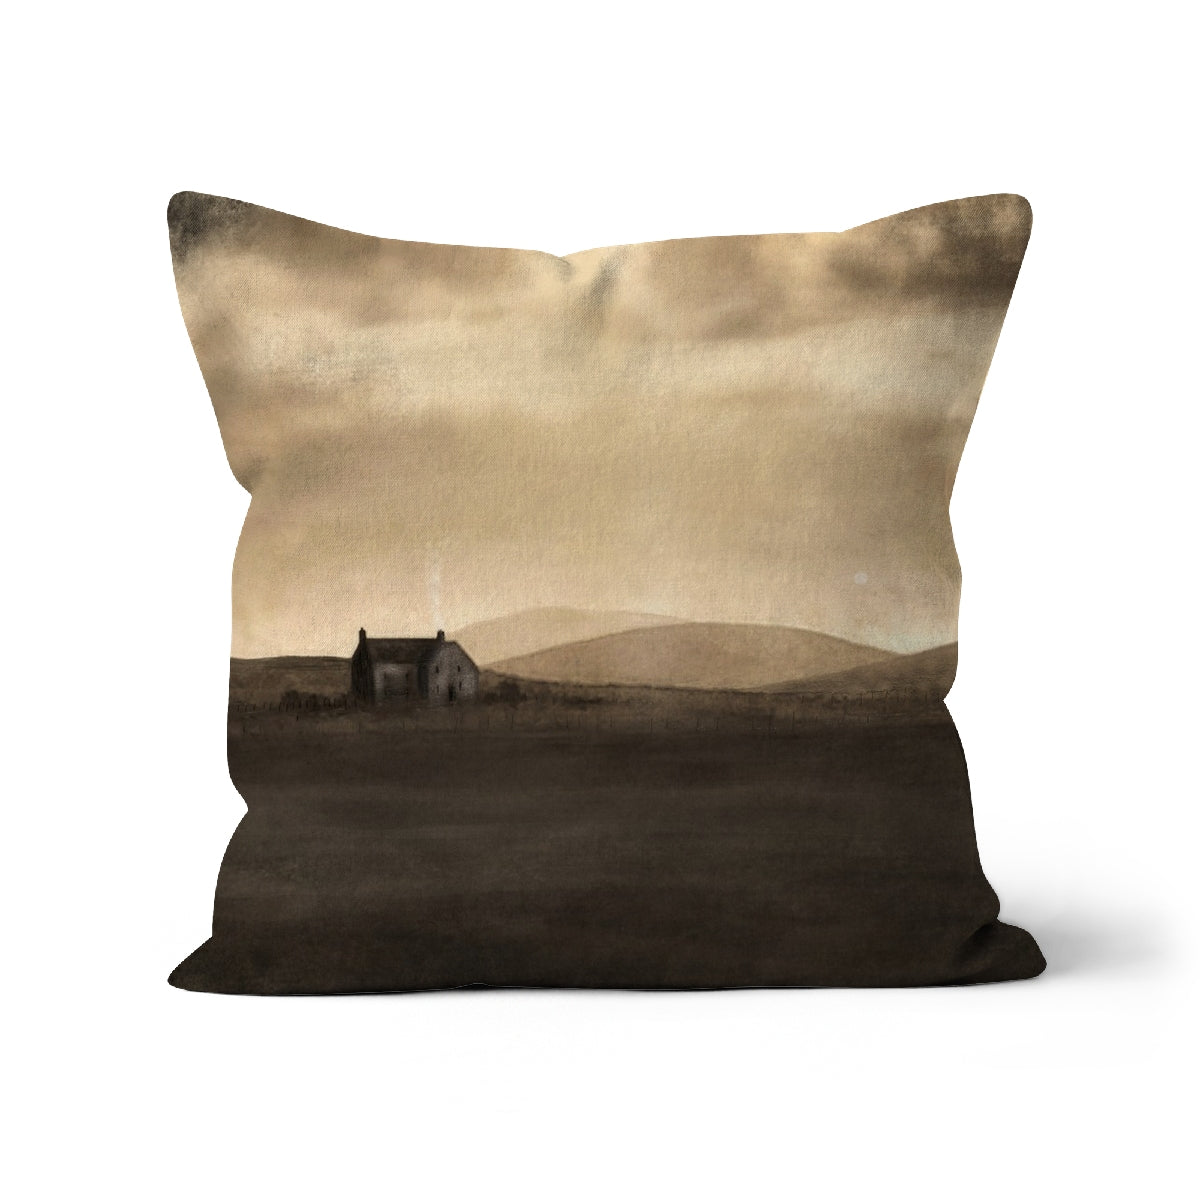 A Moonlit Croft Art Gifts Cushion-Cushions-Hebridean Islands Art Gallery-Canvas-24"x24"-Paintings, Prints, Homeware, Art Gifts From Scotland By Scottish Artist Kevin Hunter